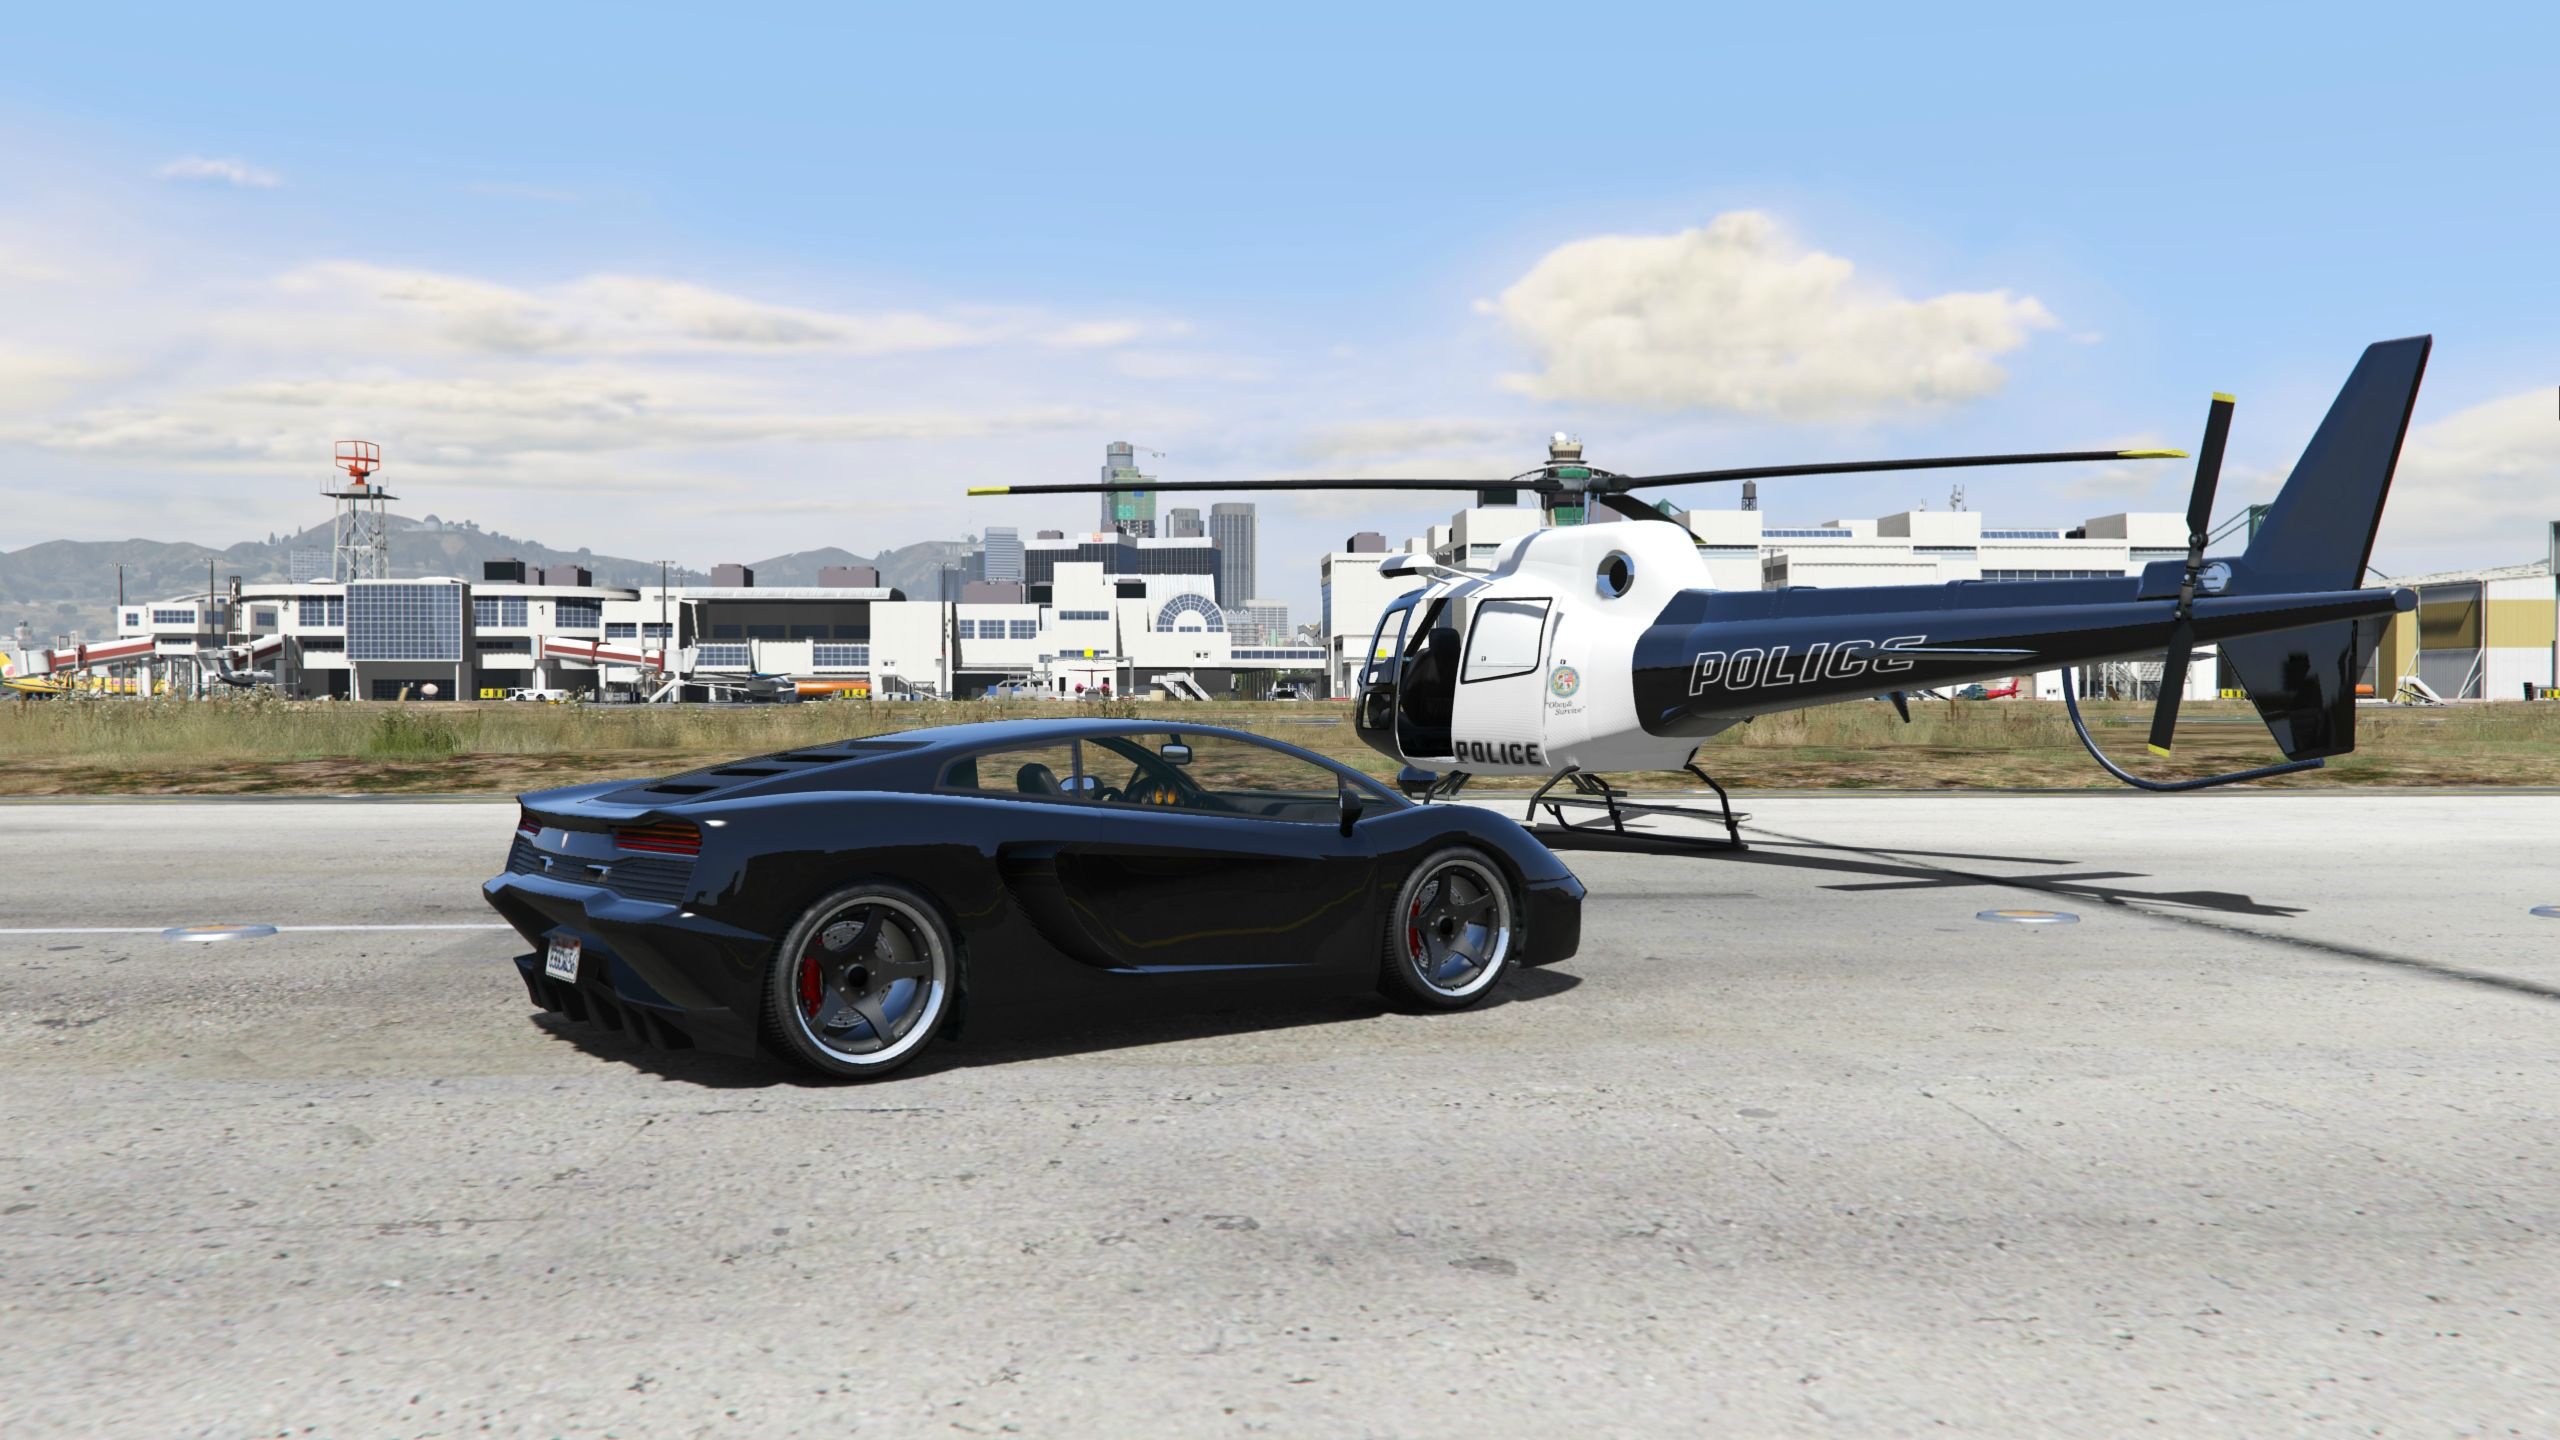 Grand Theft Auto V Mod Aims to Enable Photorealistic Graphics